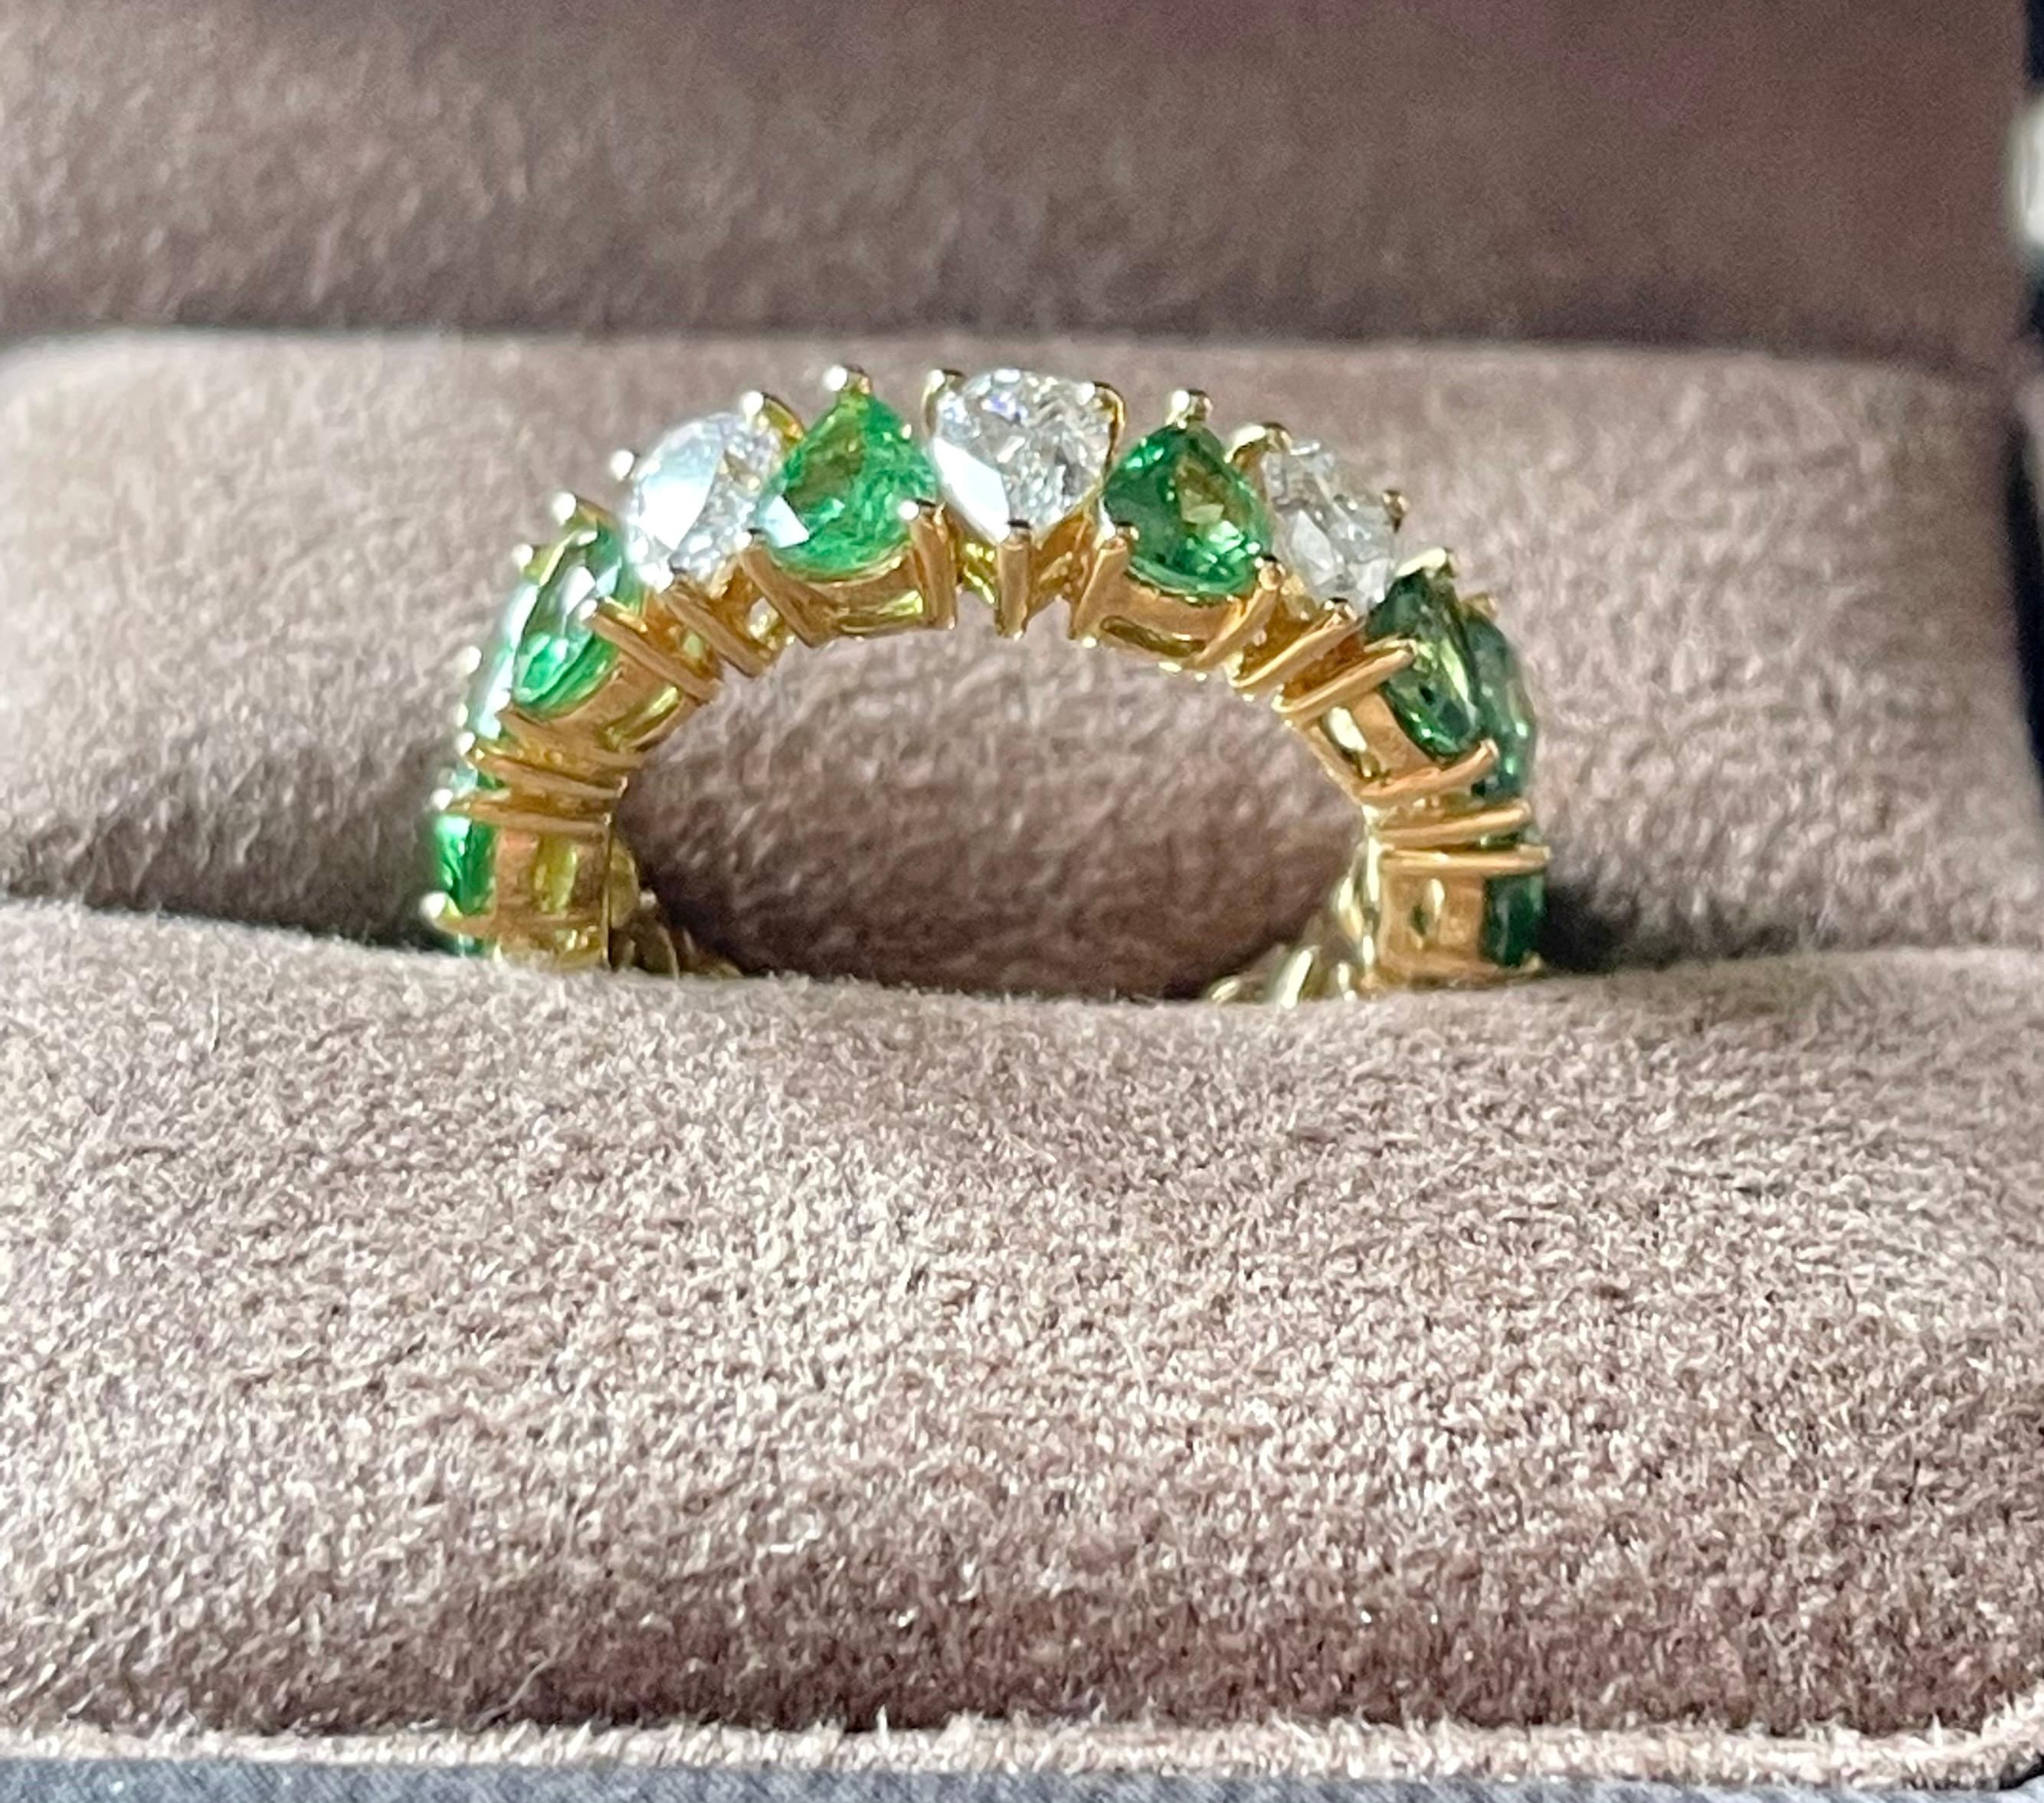 An exquisite find. This 18 K yellow Gold prong set eternity ring features 14 vivid green pear shape Tsavorites with a total weight of 4.36 ct and 3 pear shape DIamonds weiging 0.89 ct, J color, I 1 clarity. Width of ring measures 6 mm at widest